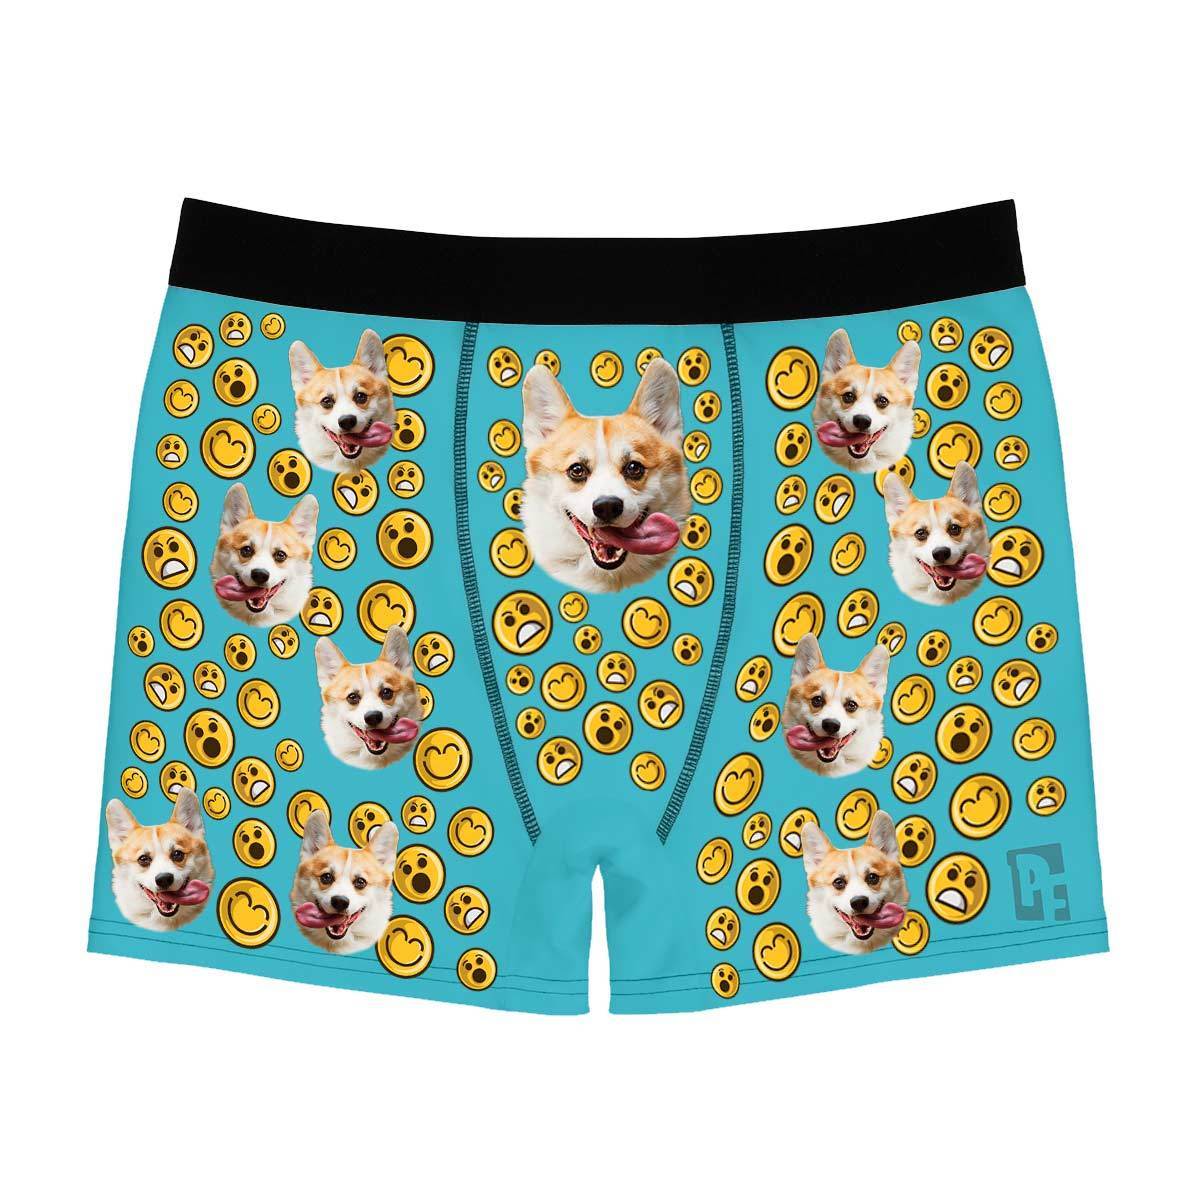 Blue Smiles men's boxer briefs personalized with photo printed on them